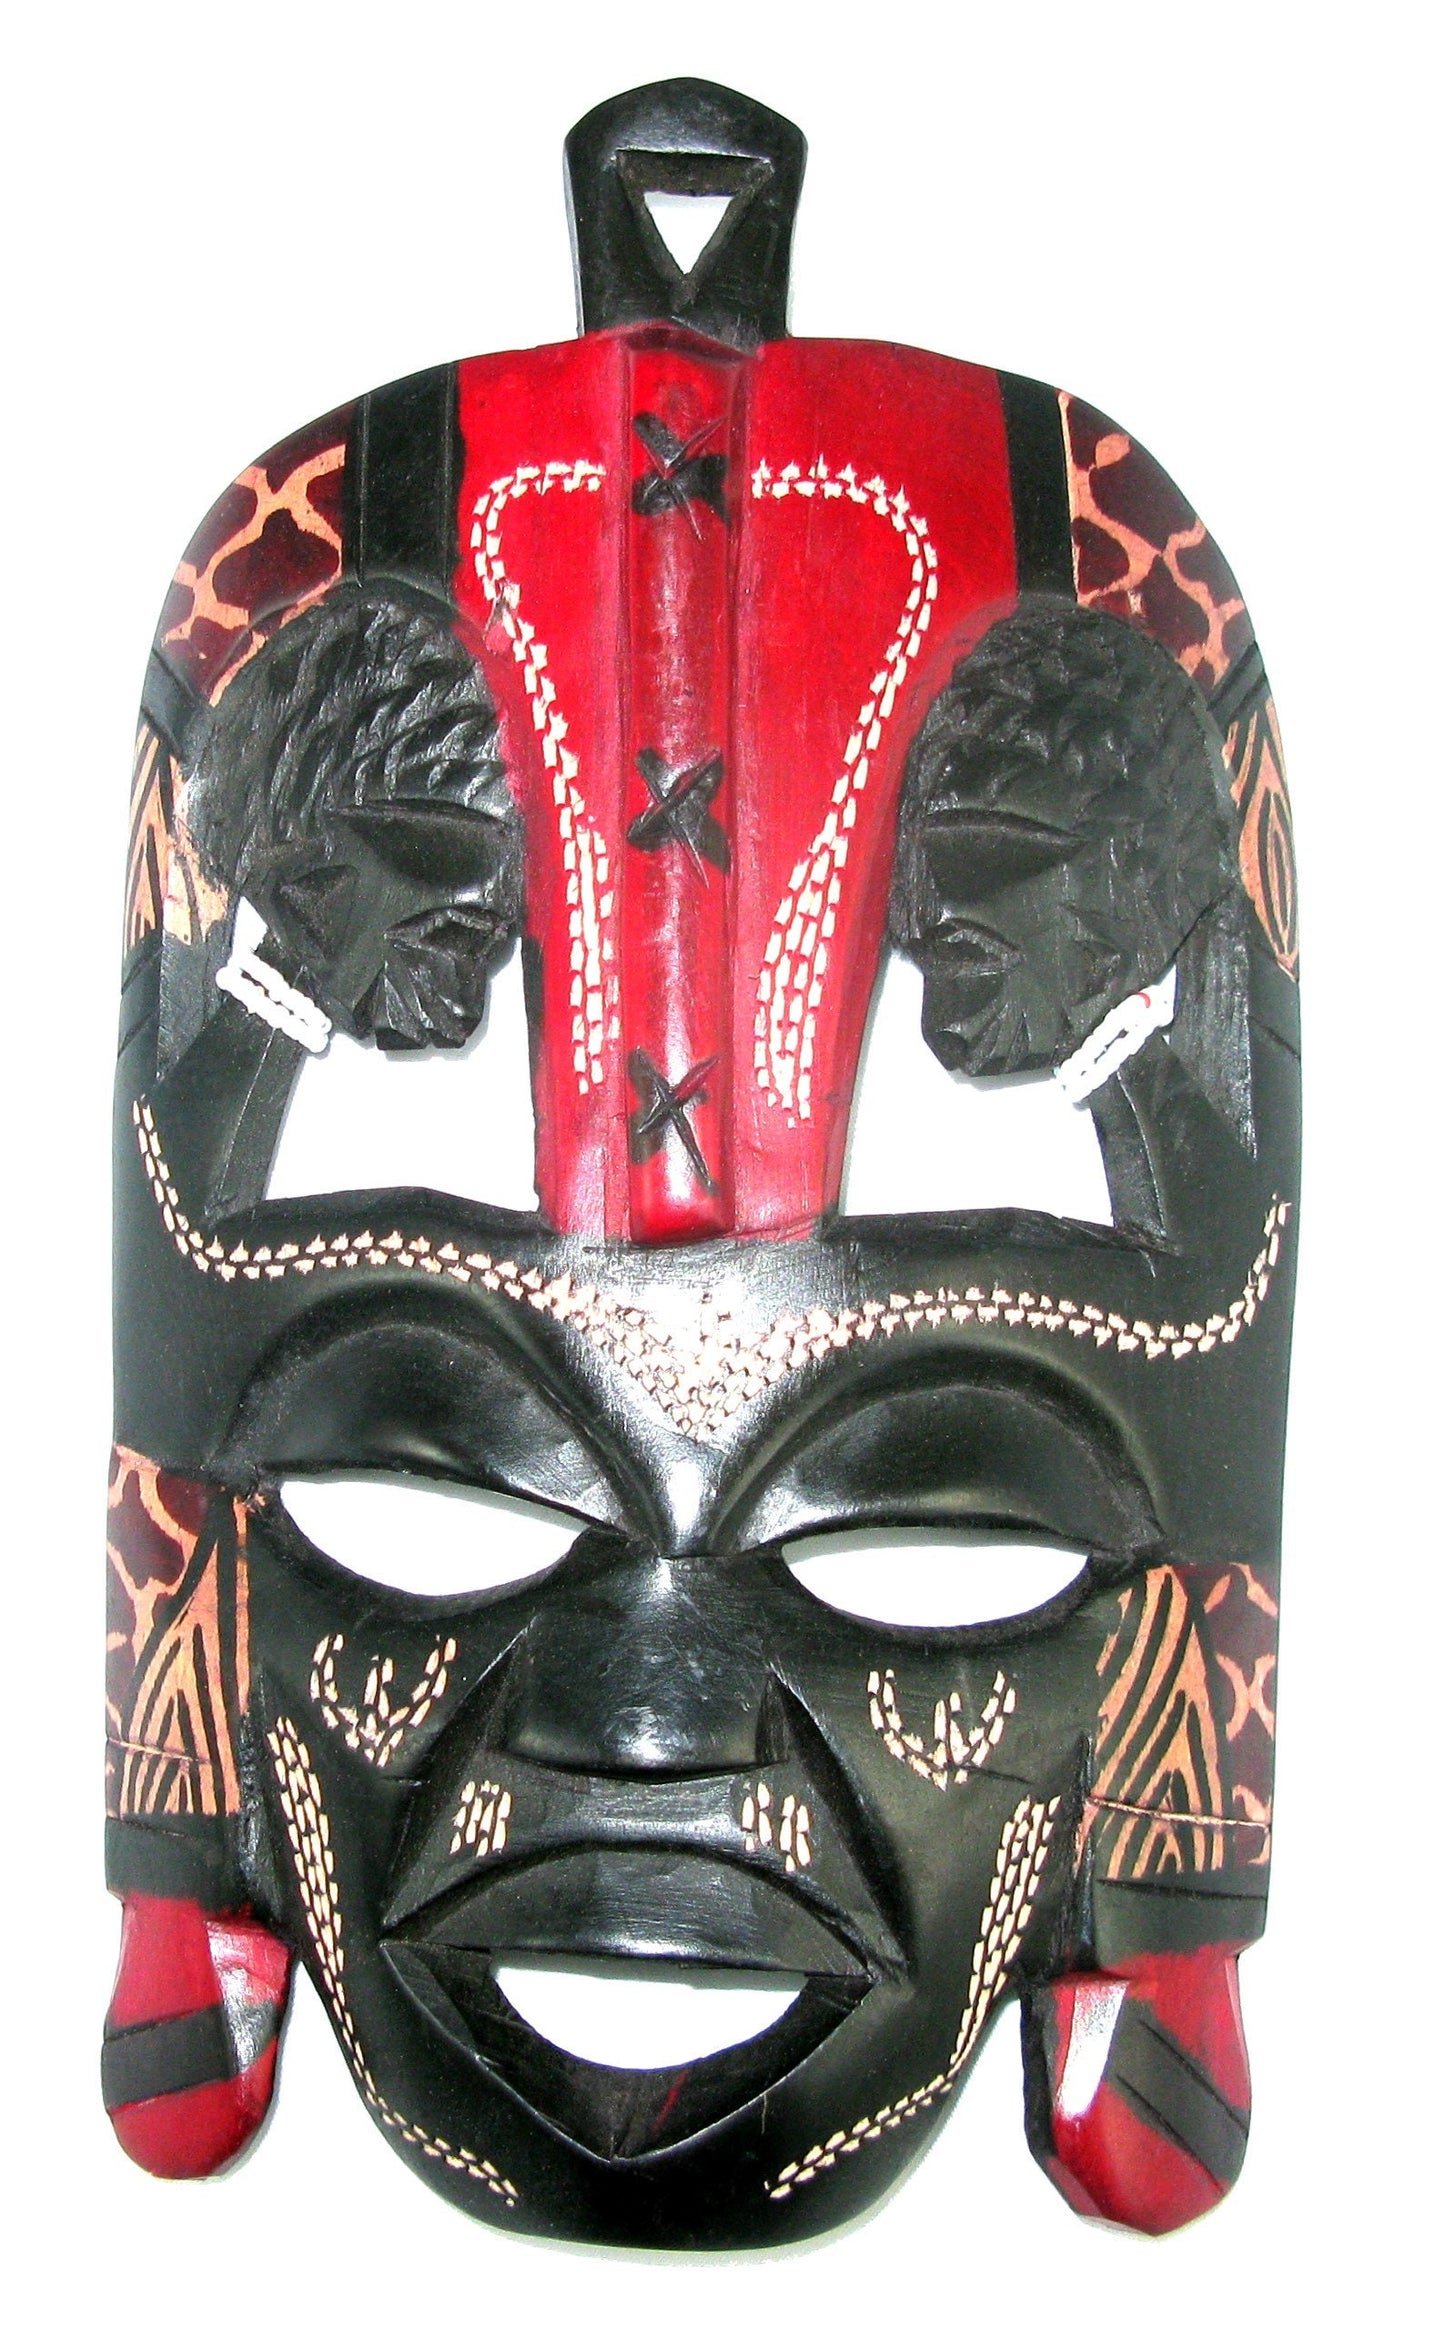 African Mask Traditional Maassai Devil Mask 9 in / 23 cm, Long Mask 10 in / 25 cm or Quad Long Mask 24 in / 60 cm with Story-card